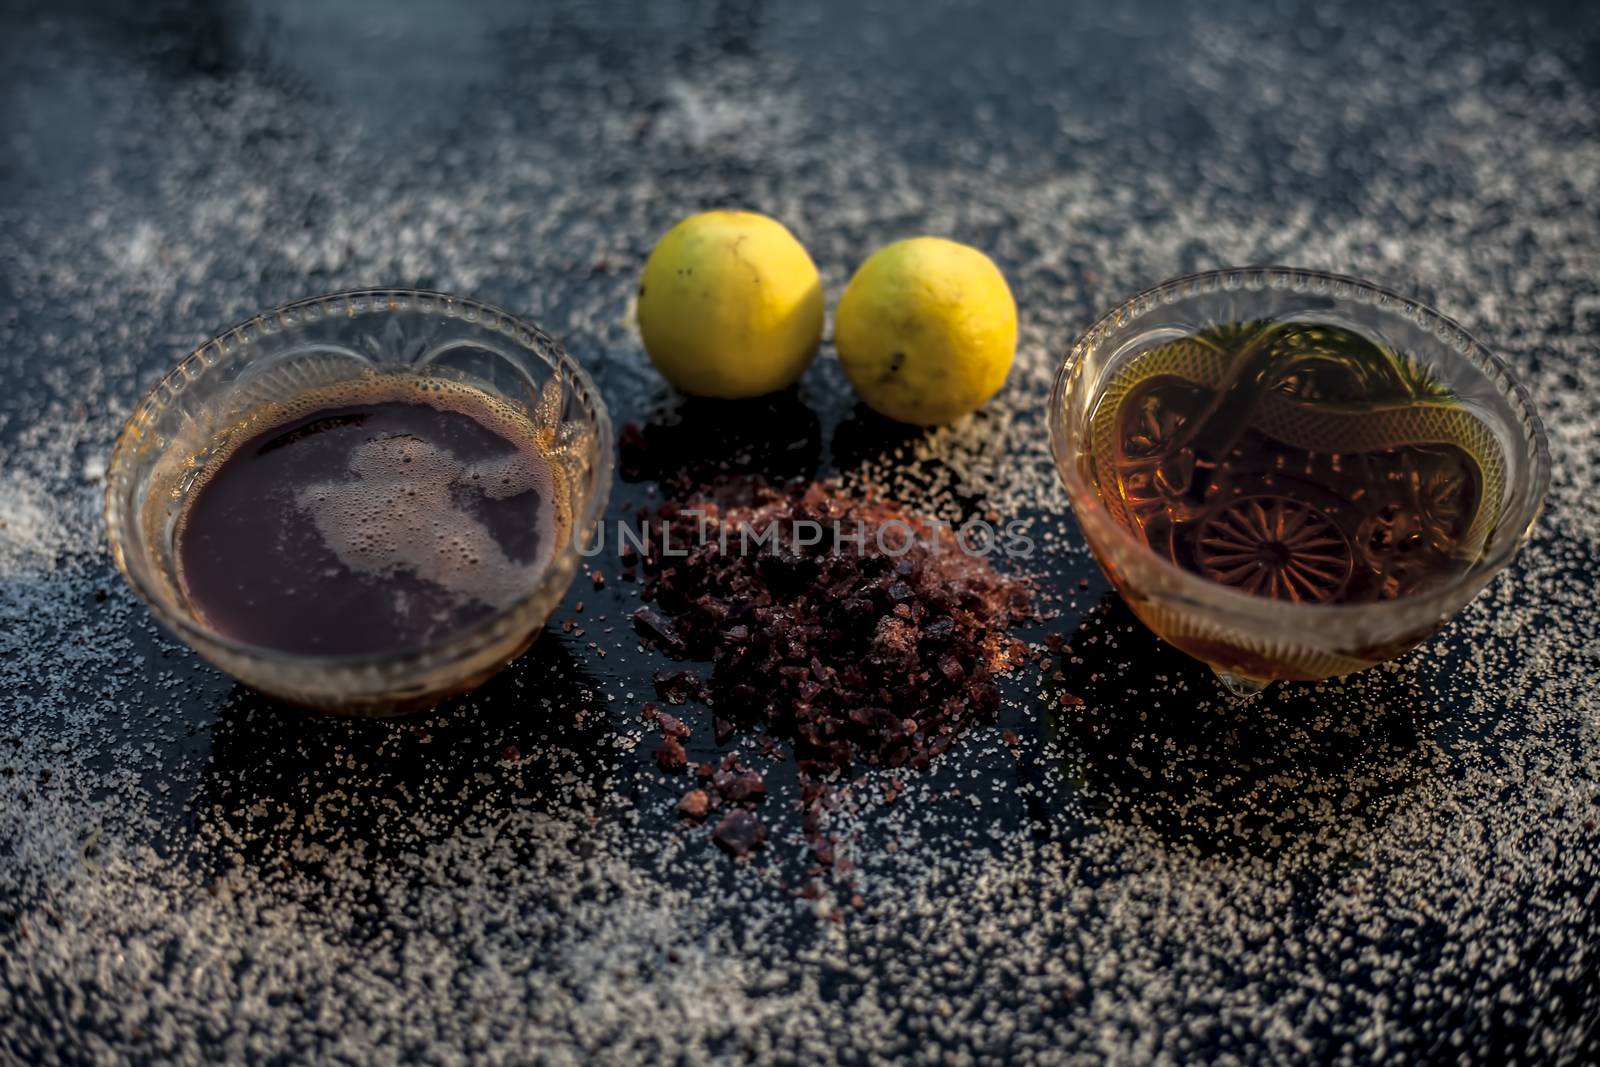 All-purpose ayurvedic salt face mask on the black wooden surface consisting of salt, rock salt, lemon juice, and honey. The face mask as well as a face pack. Horizontal top shot.